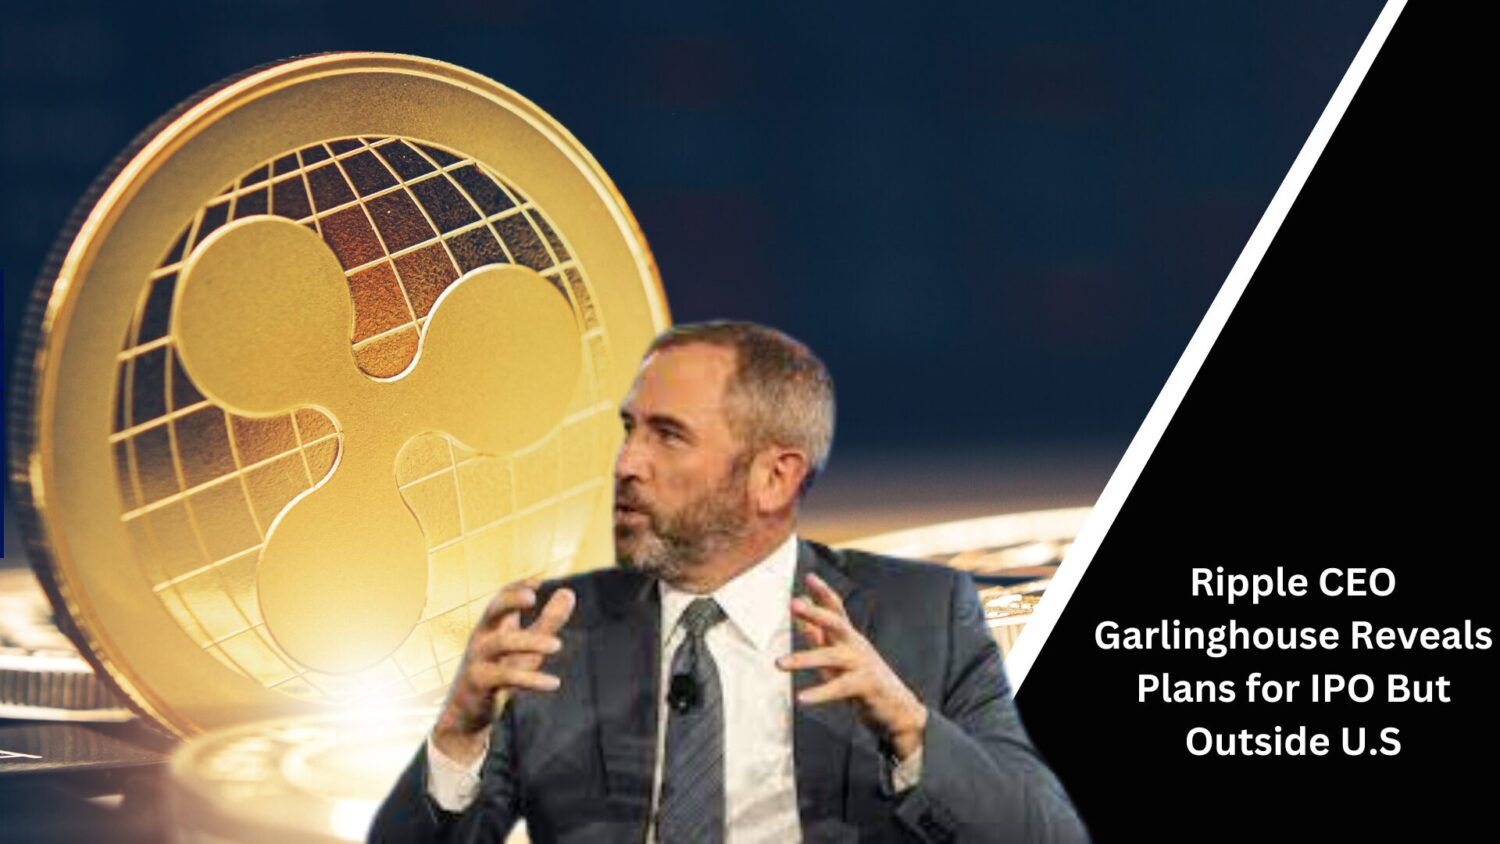 Ripple Ceo Garlinghouse Reveals Plans For Ipo But Outside U.s